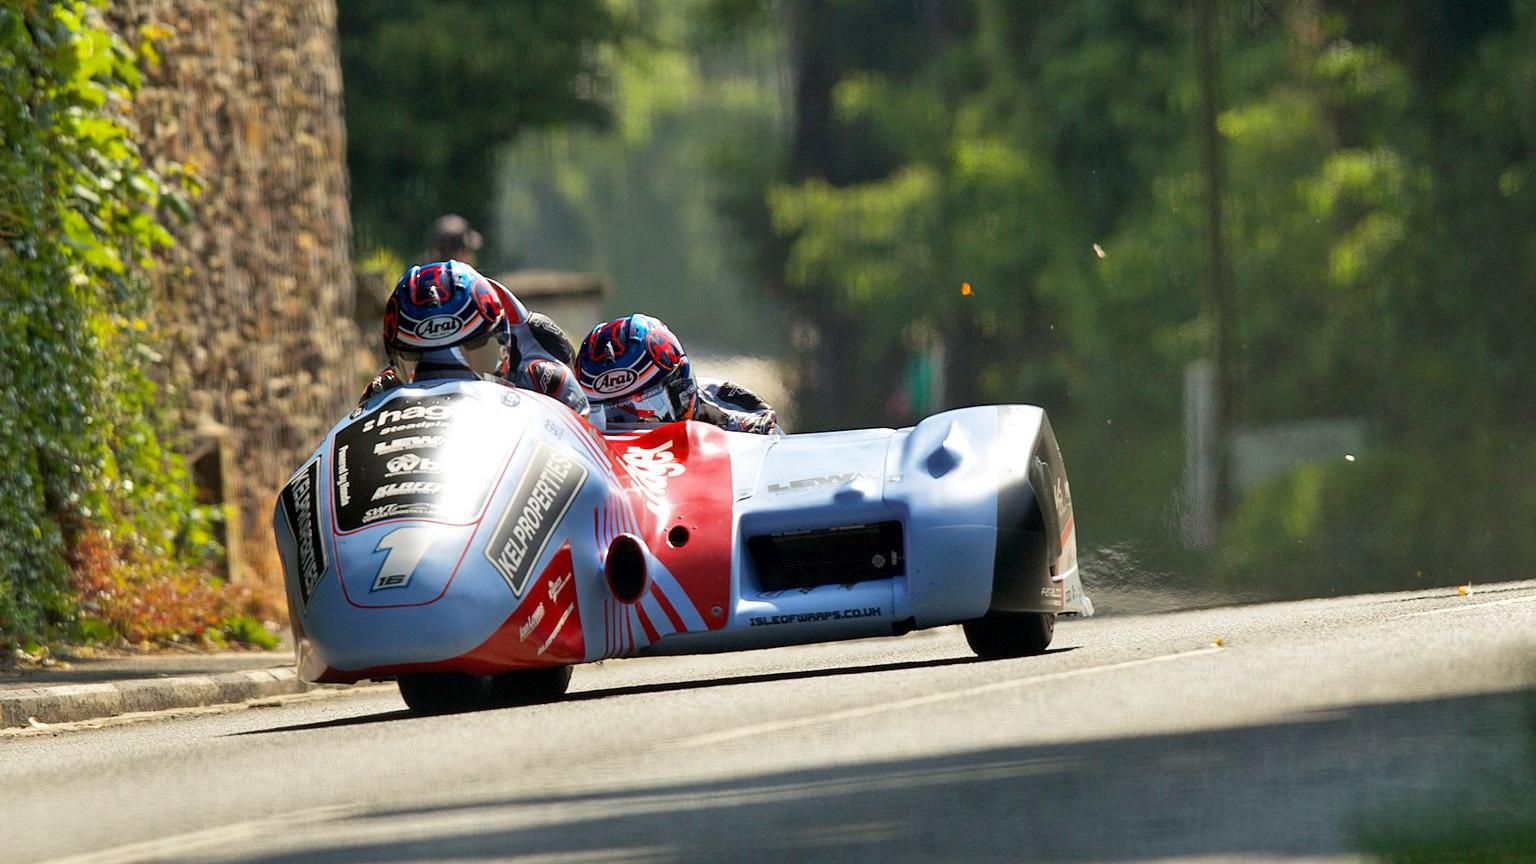 A light blue and red sidecar outfit on a race track with hedges and greenery in the background